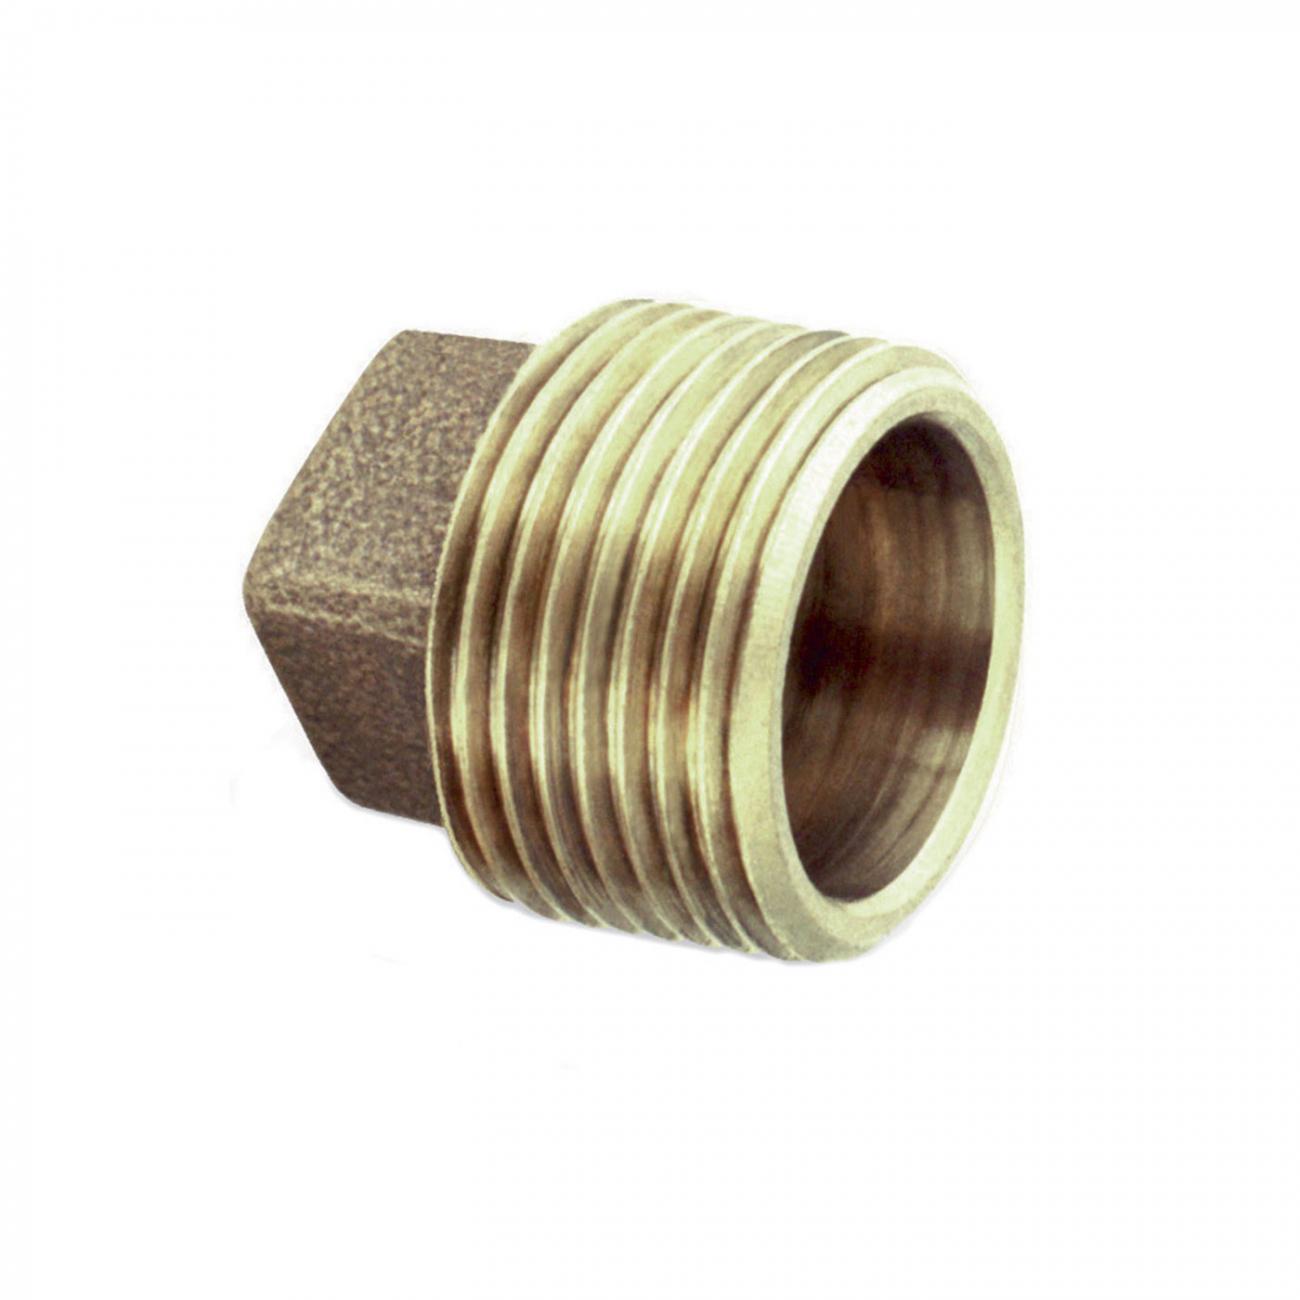 TAPON MACHO 3/4 BRONCE